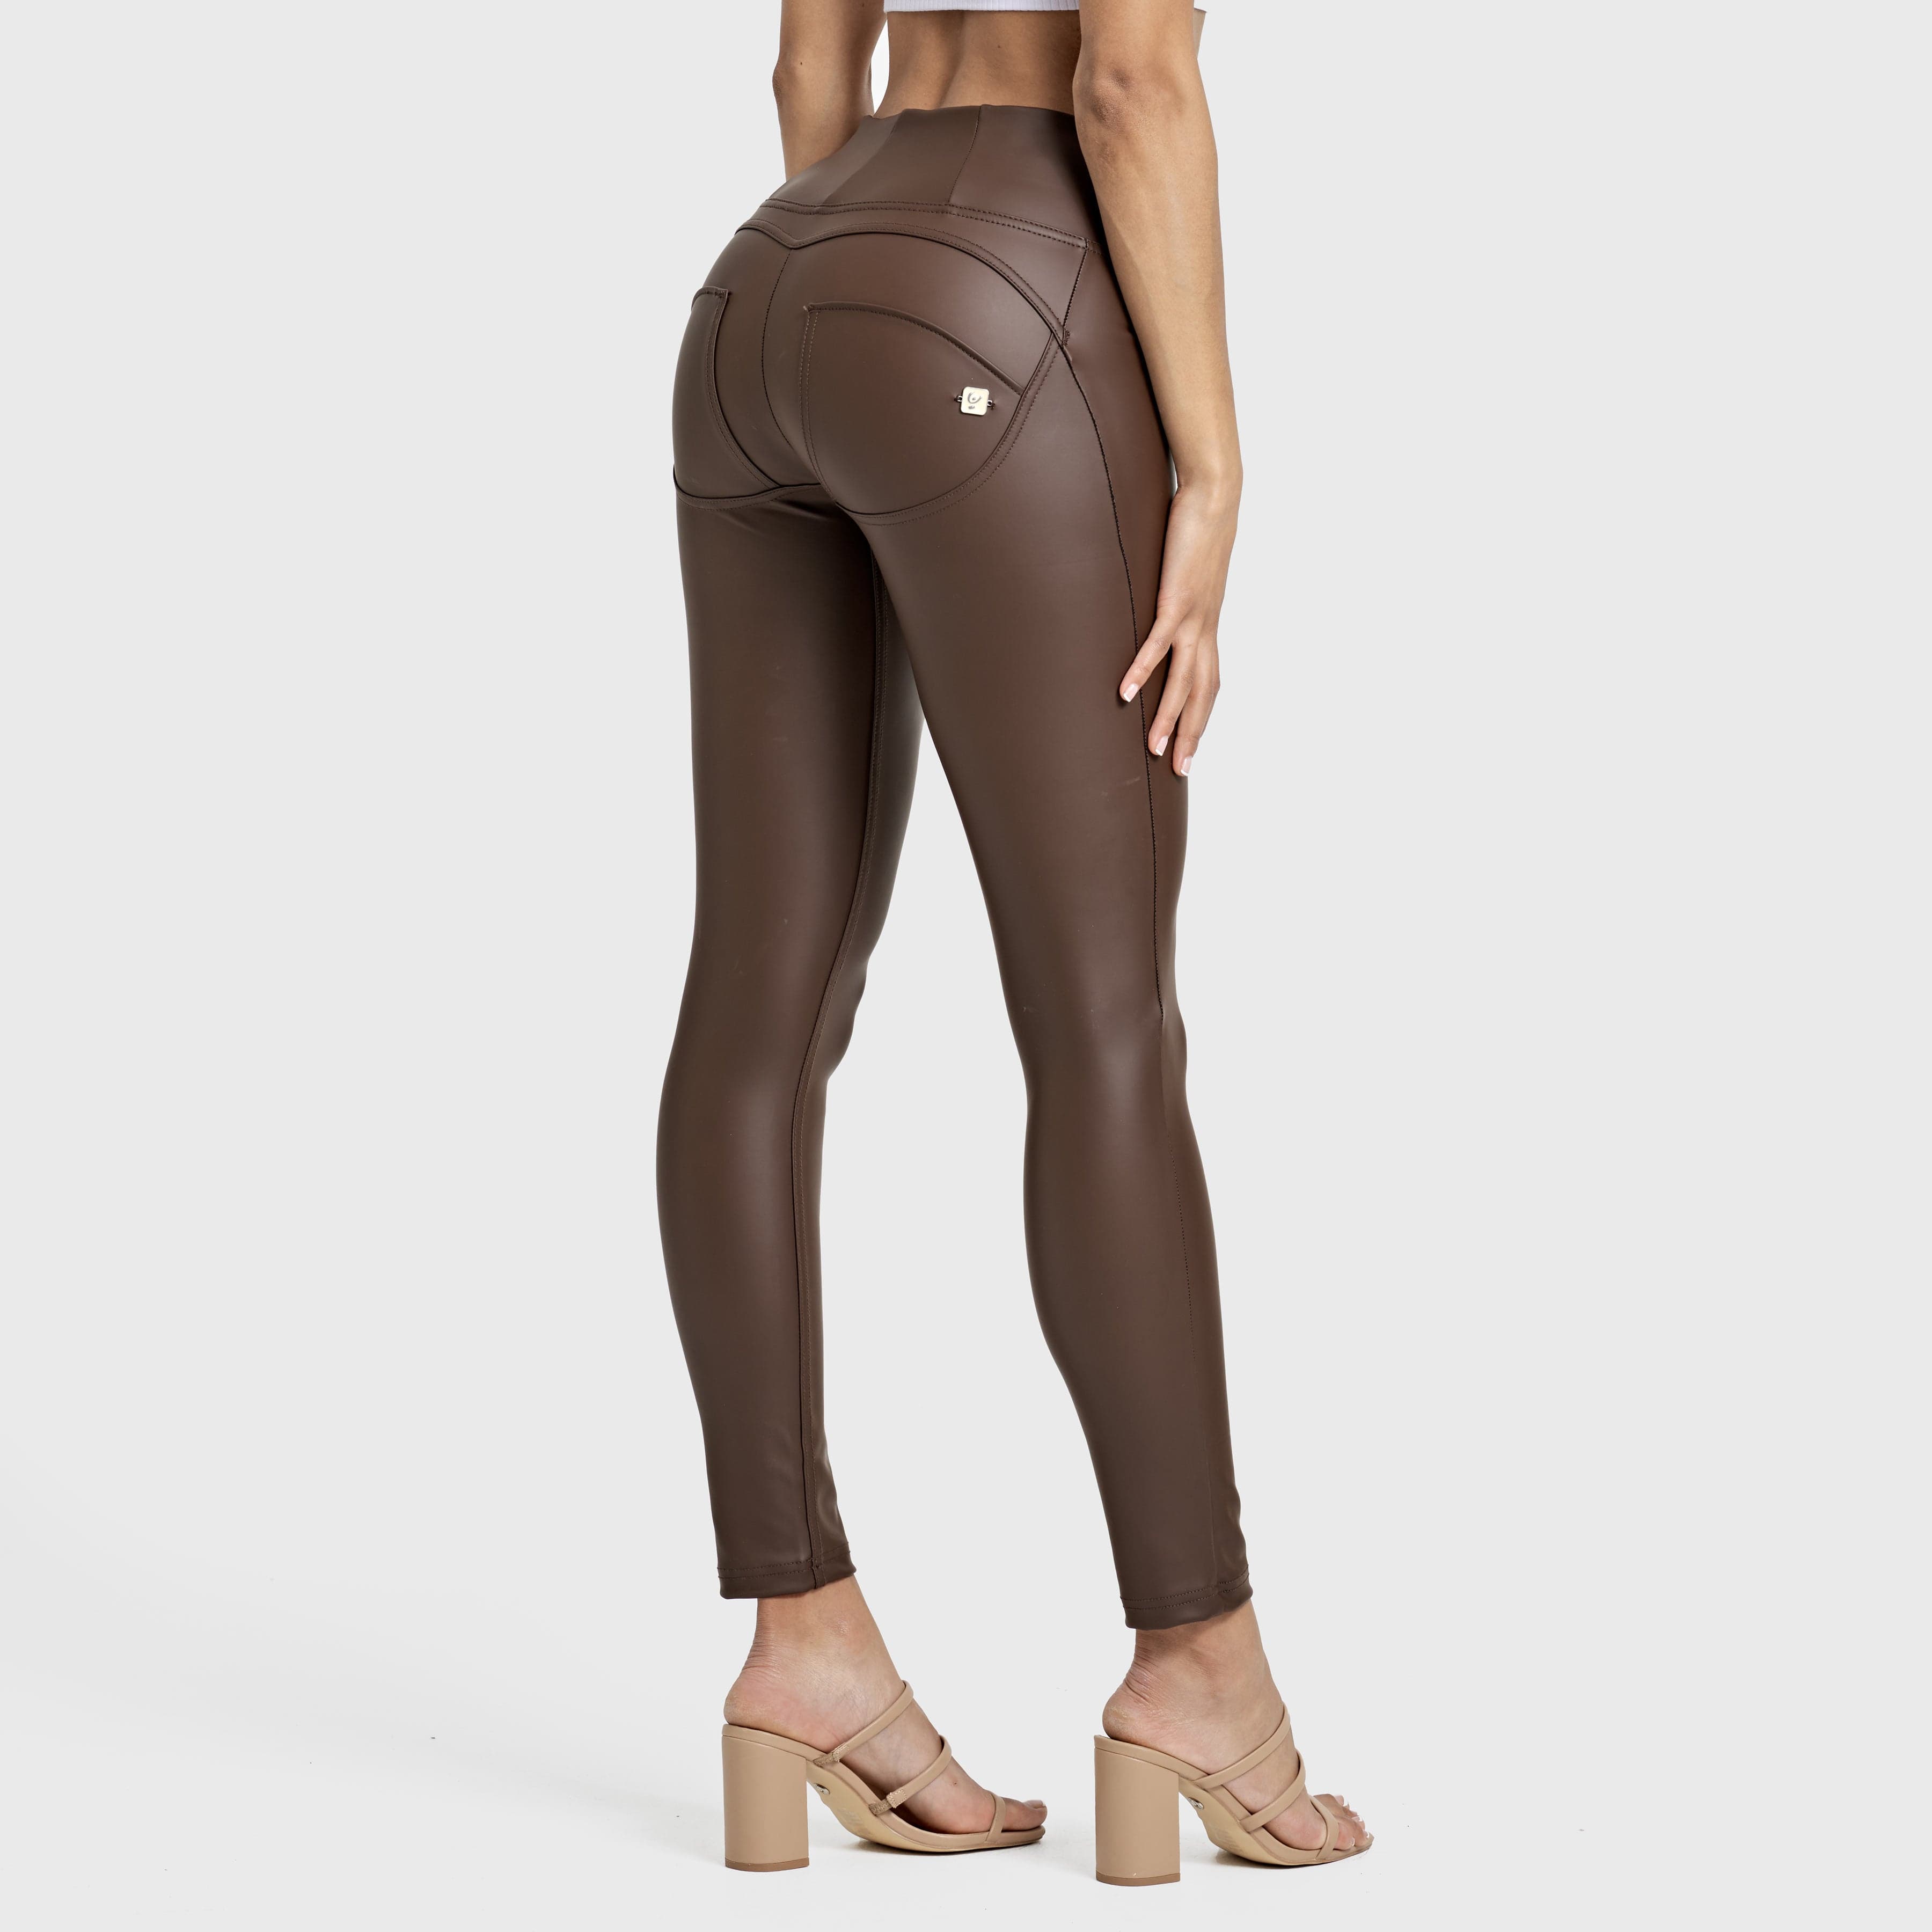 WR.UP® Faux Leather - High Waisted - Petite Length - Chocolate 2